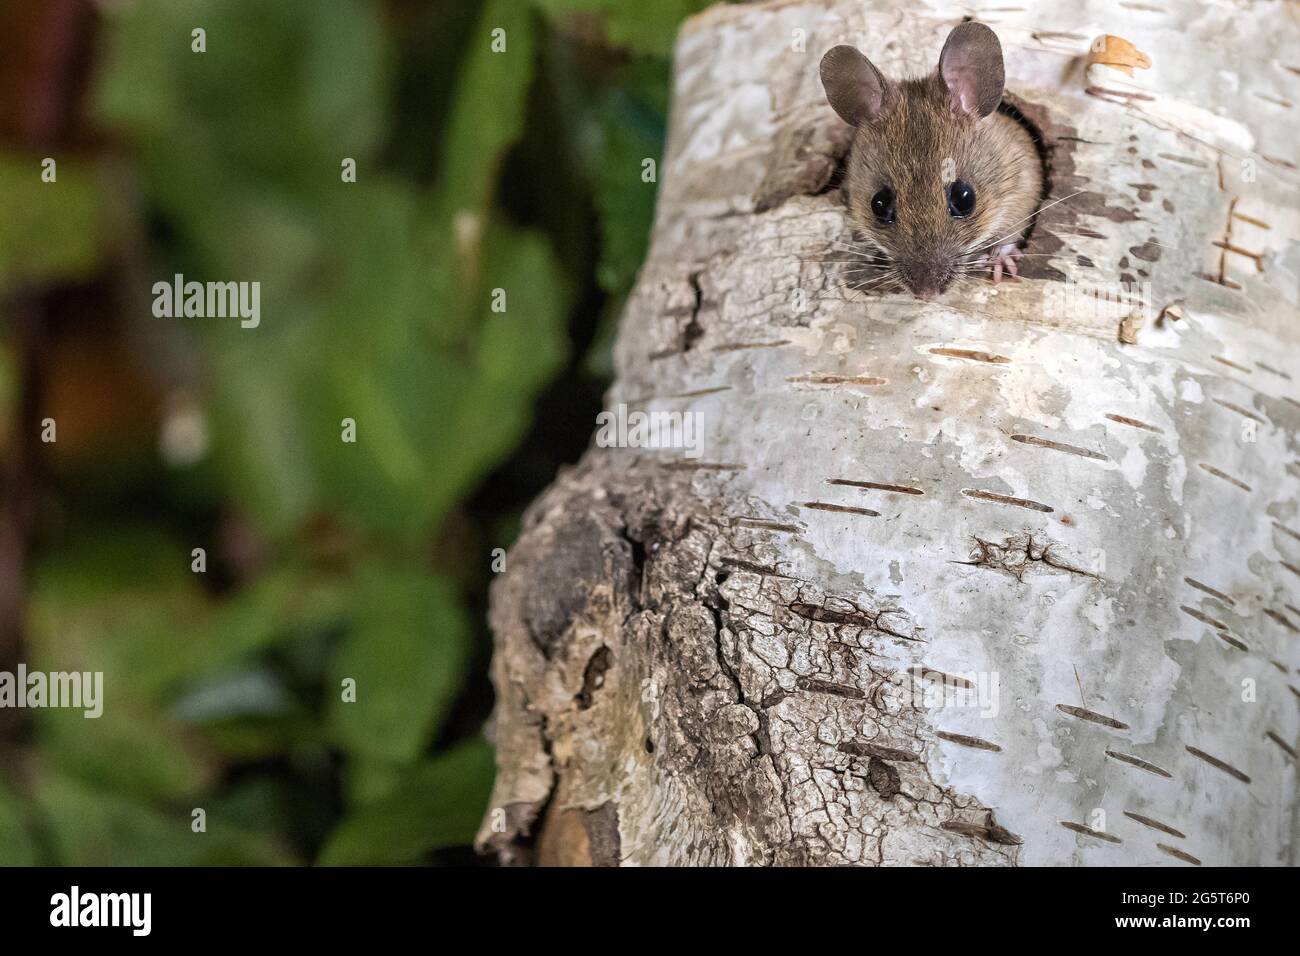 yellow-necked mouse (Apodemus flavicollis), peering out of a hole in a birch trunk, Germany, Mecklenburg-Western Pomerania Stock Photo